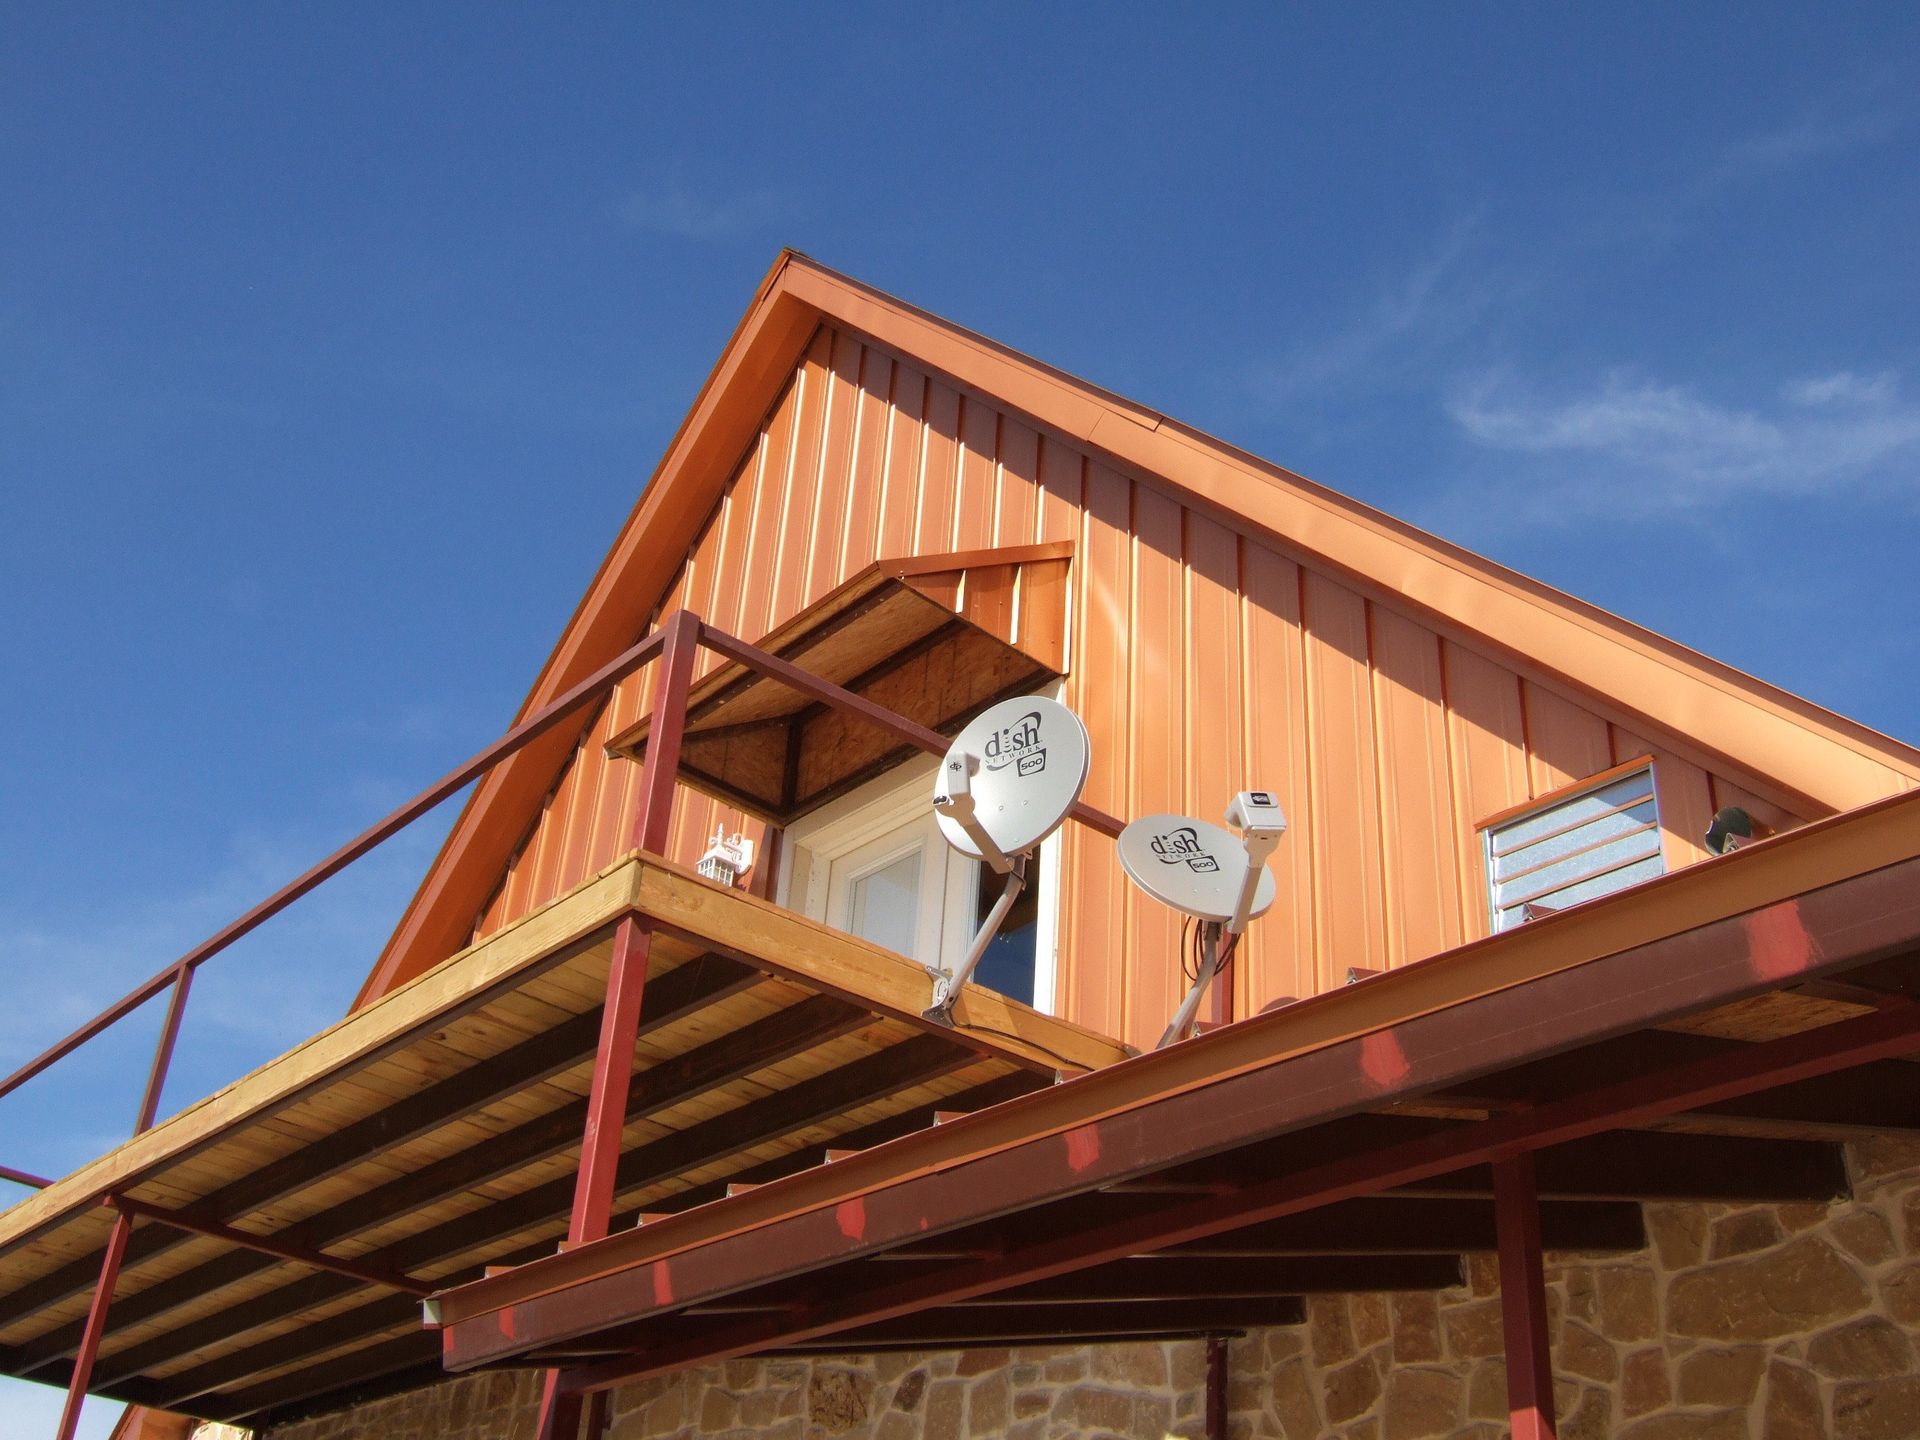 Residential Metal Roof Austin Roofing and Construction